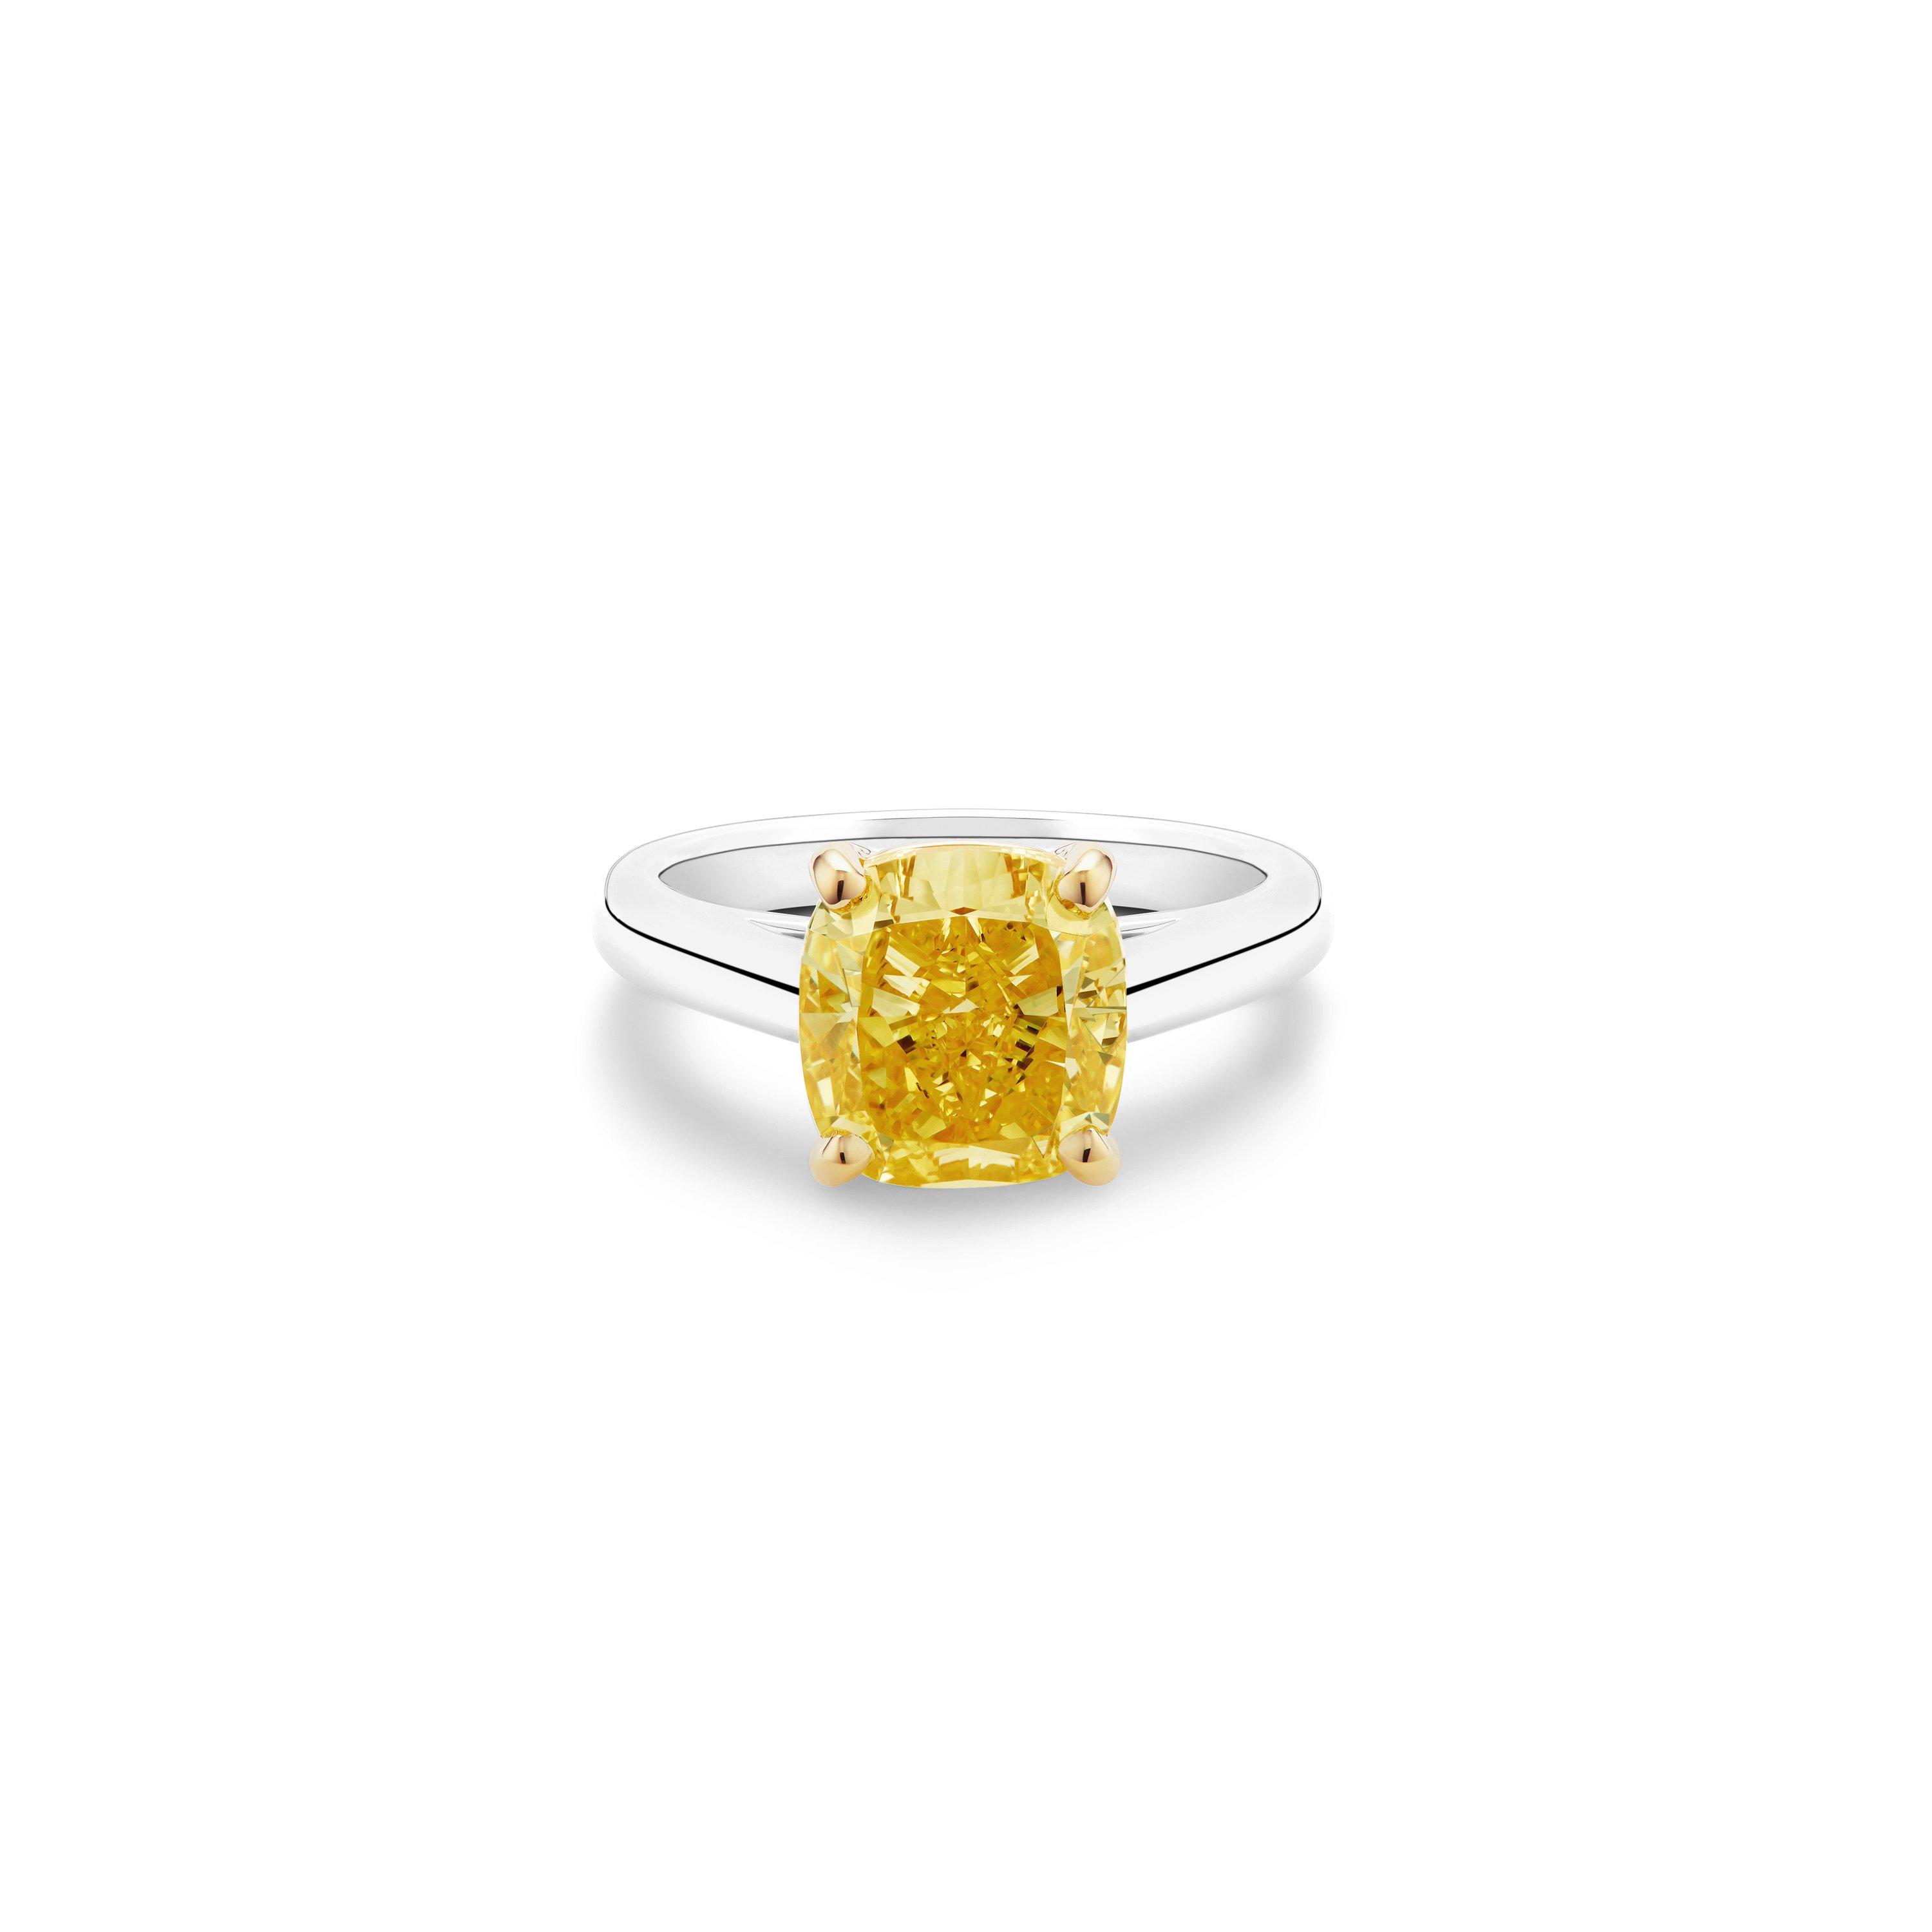 Natural Fancy Yellow Diamond Ring in Platinum & Gold